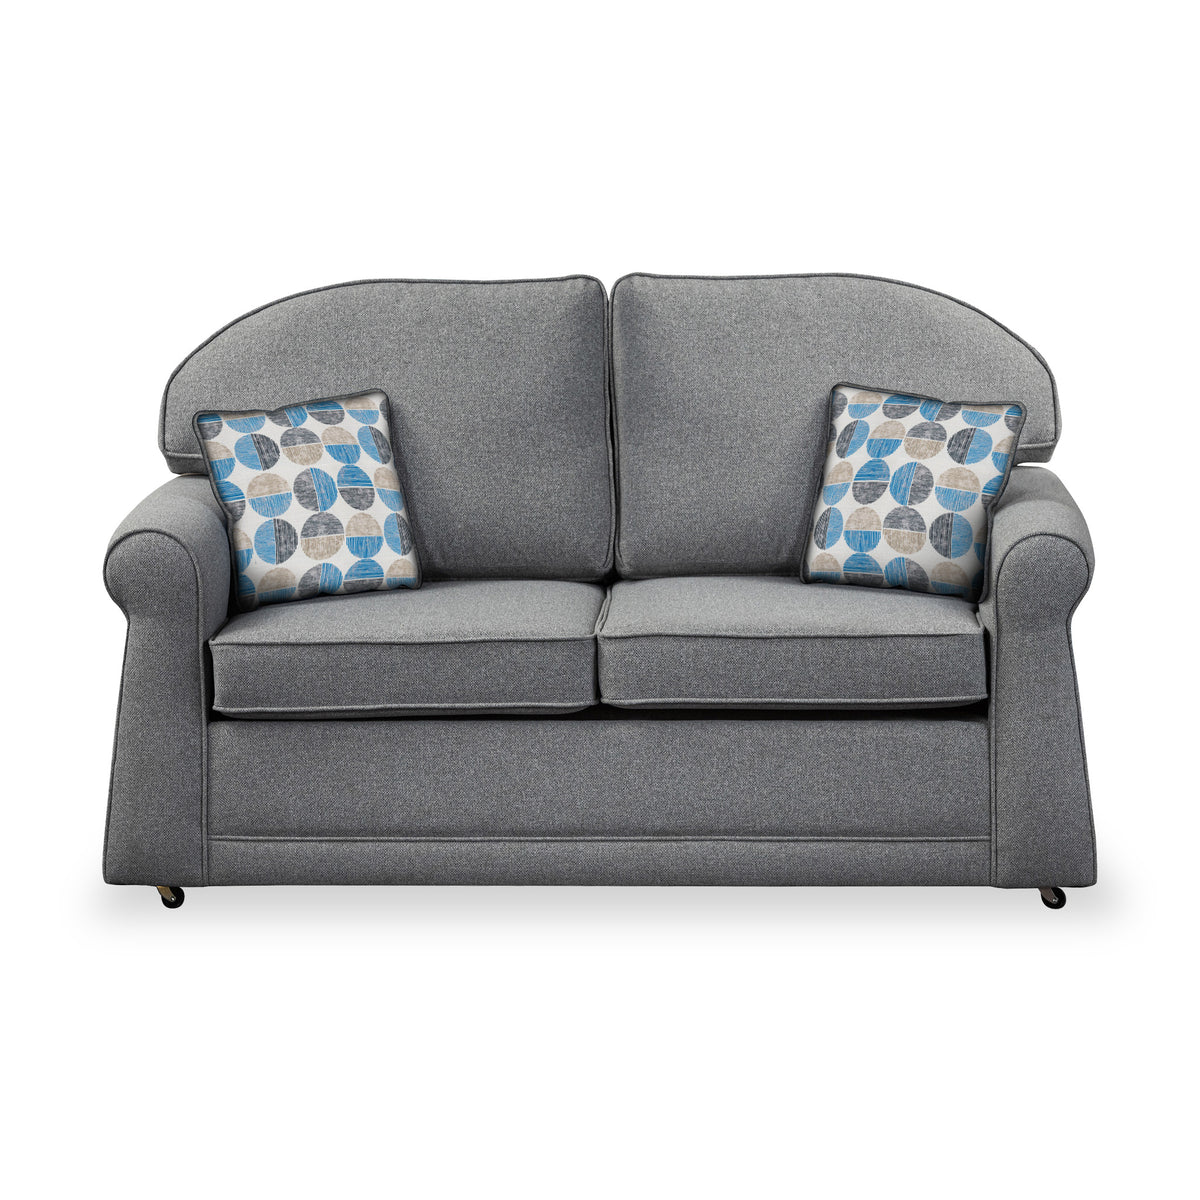 Croxdon Silver Faux Linen 2 Seater Sofabed with Blue Scatter Cushions from Roseland Furniture